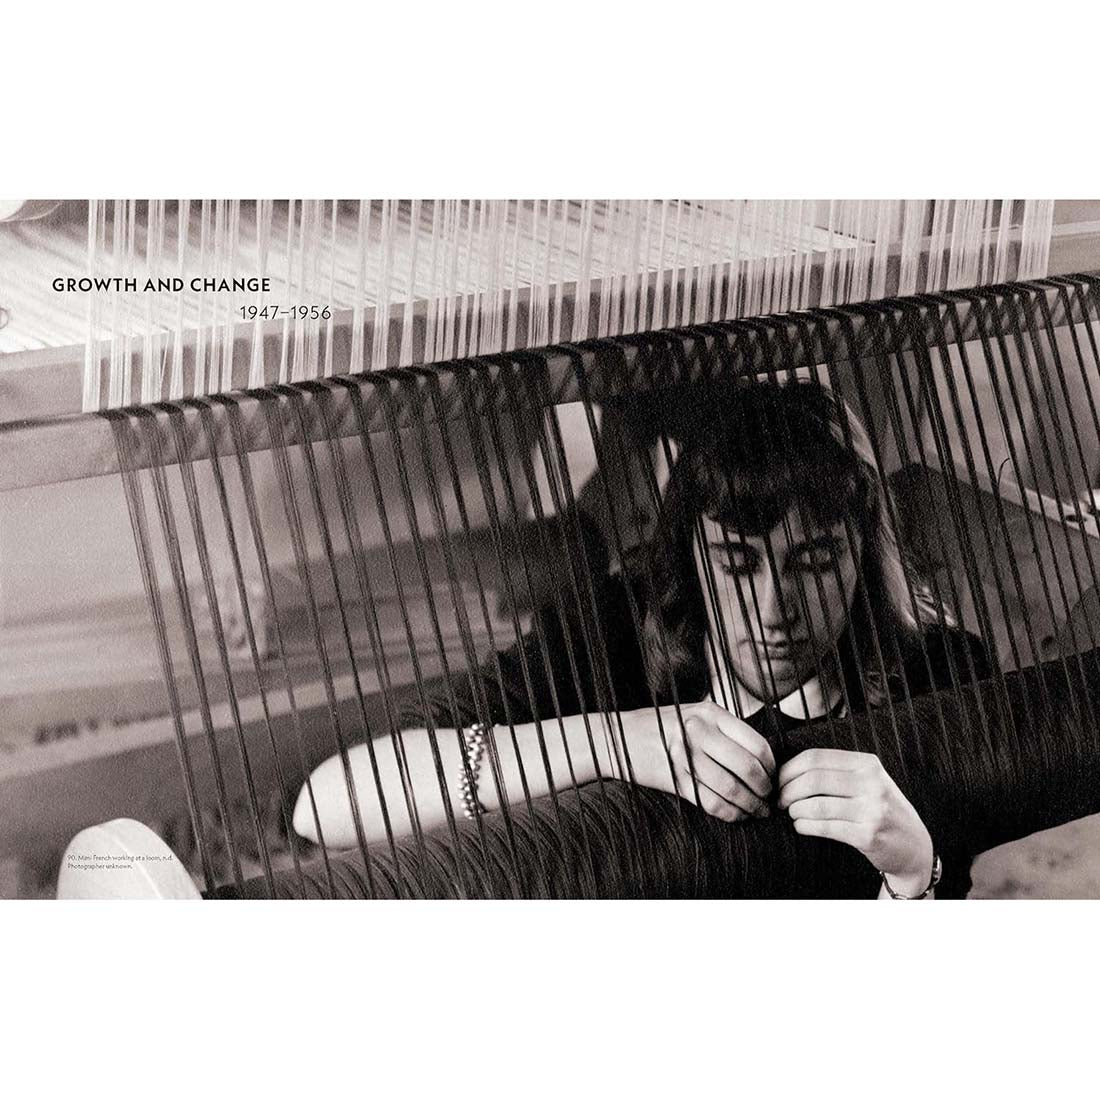 Weaving at Black Mountain College